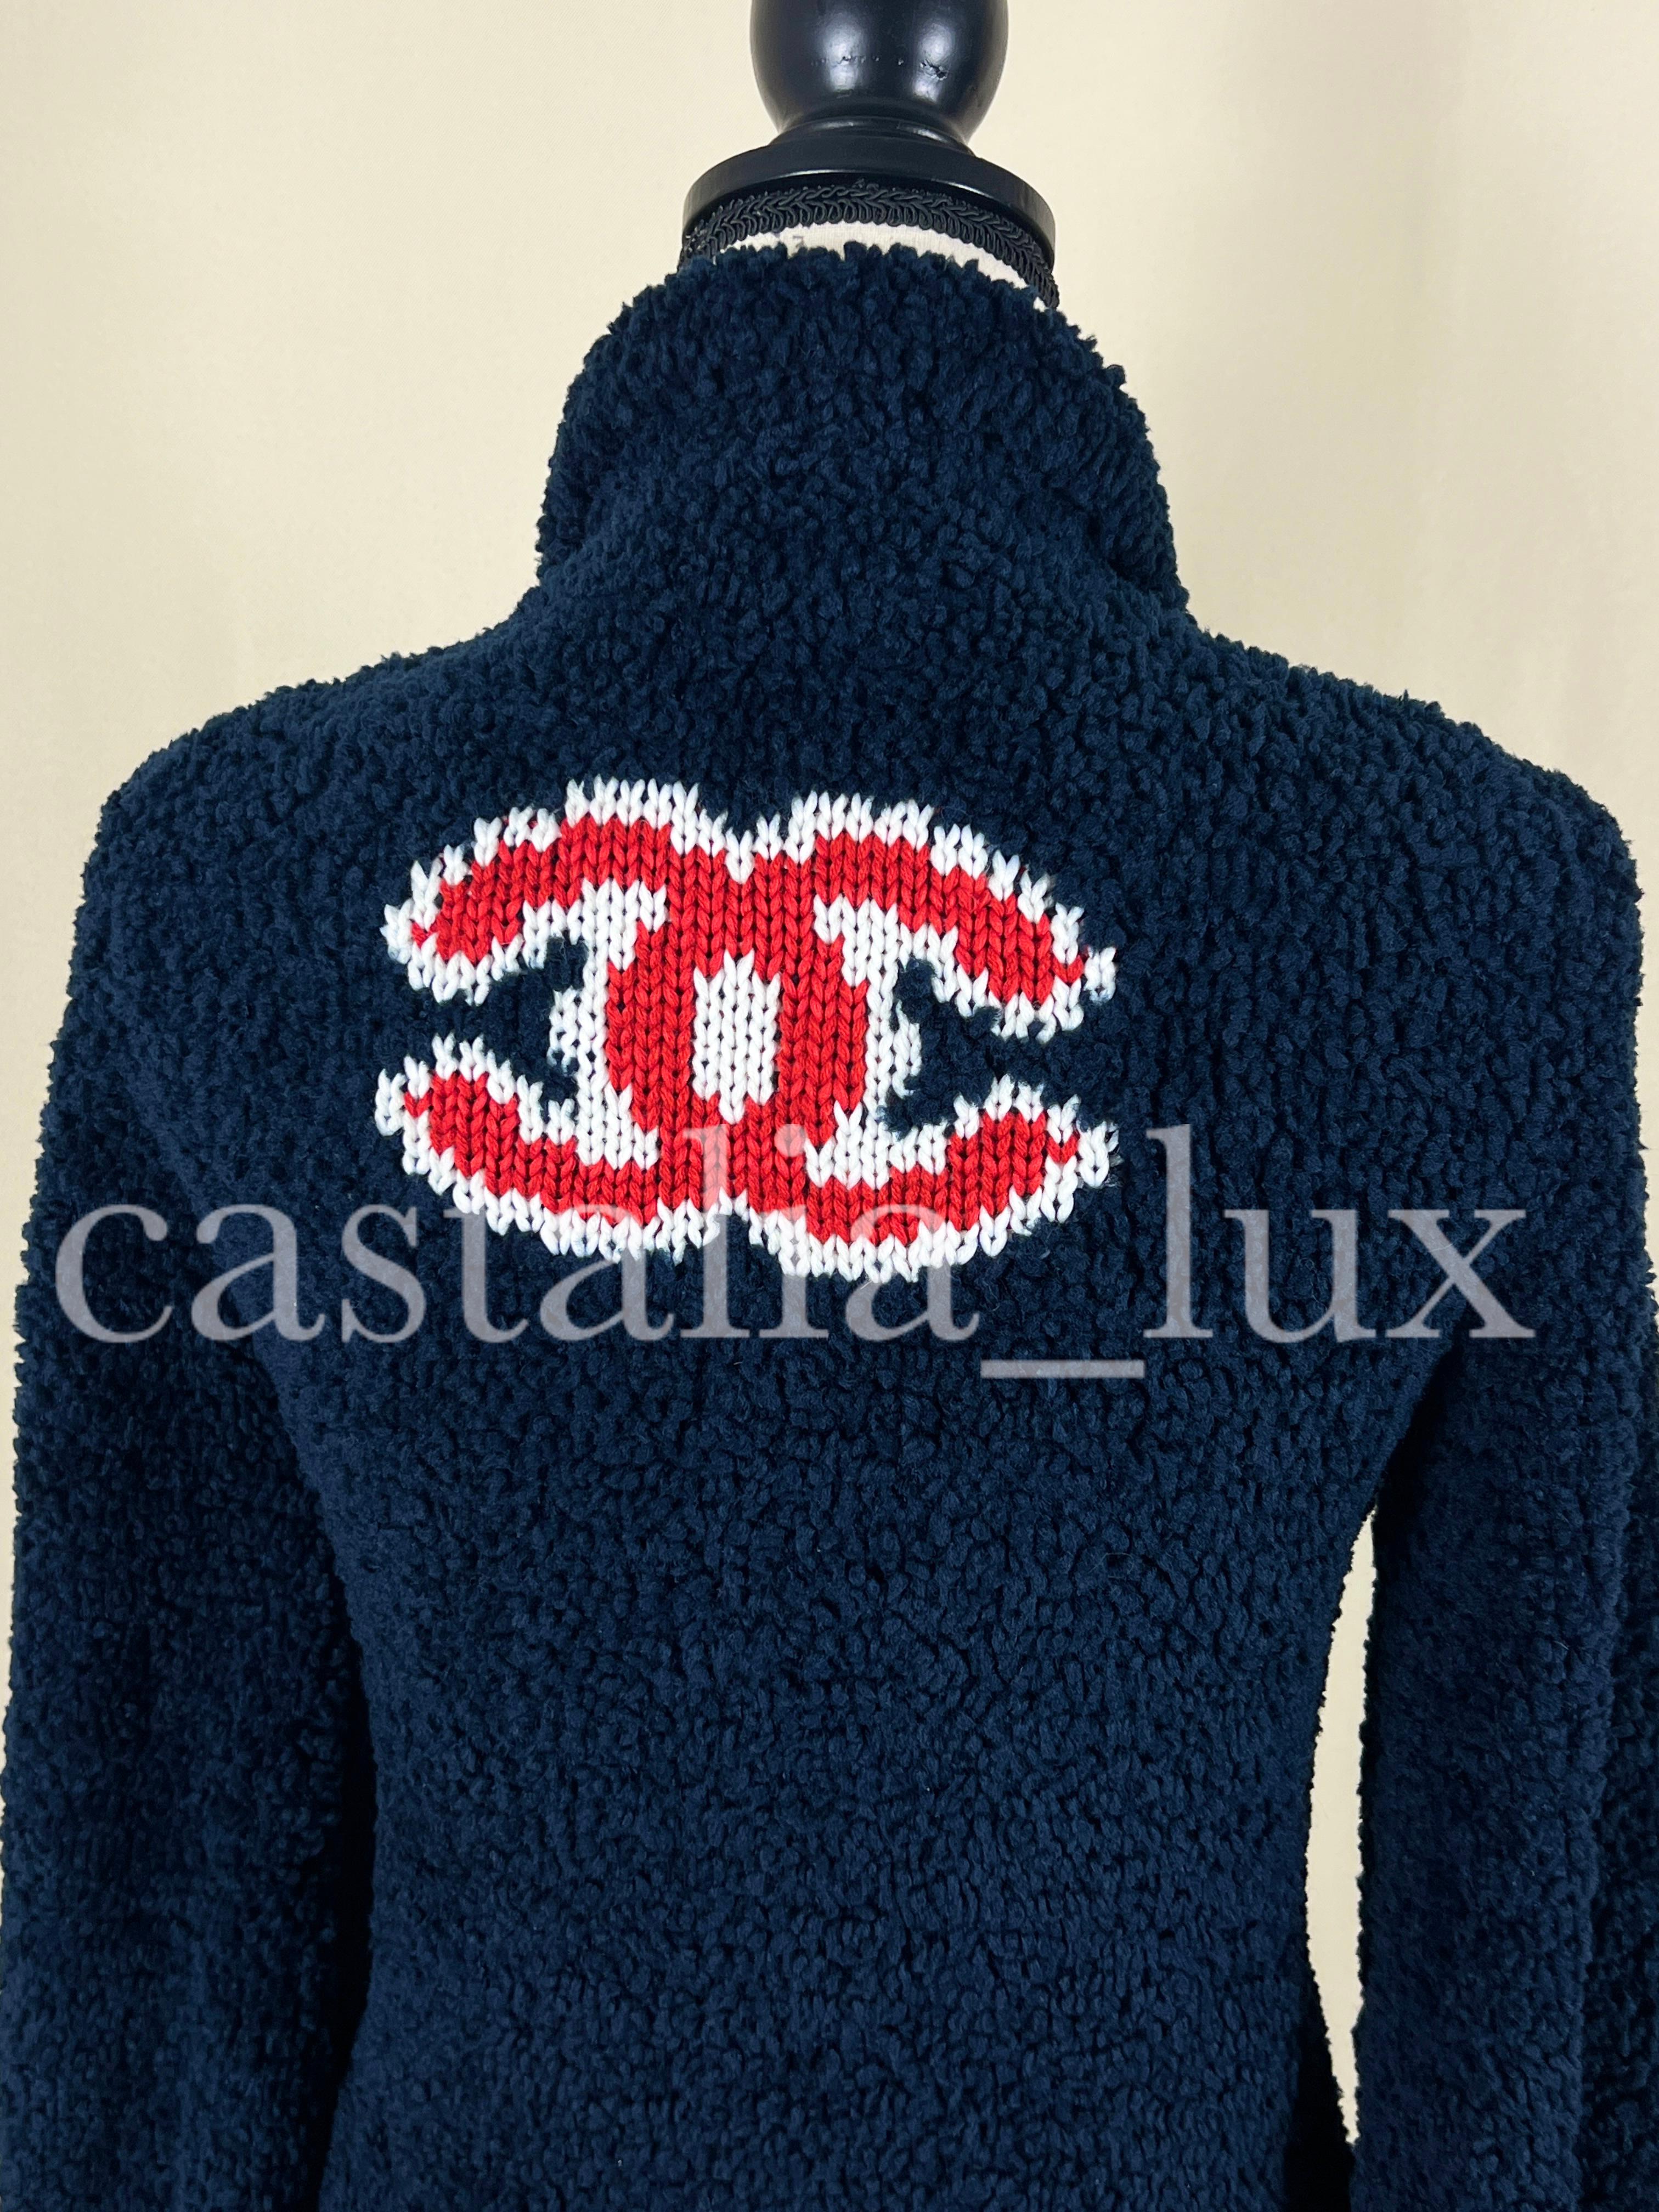 Chanel New Iconic CC Logo Teddy Jacket / Bomber For Sale 7